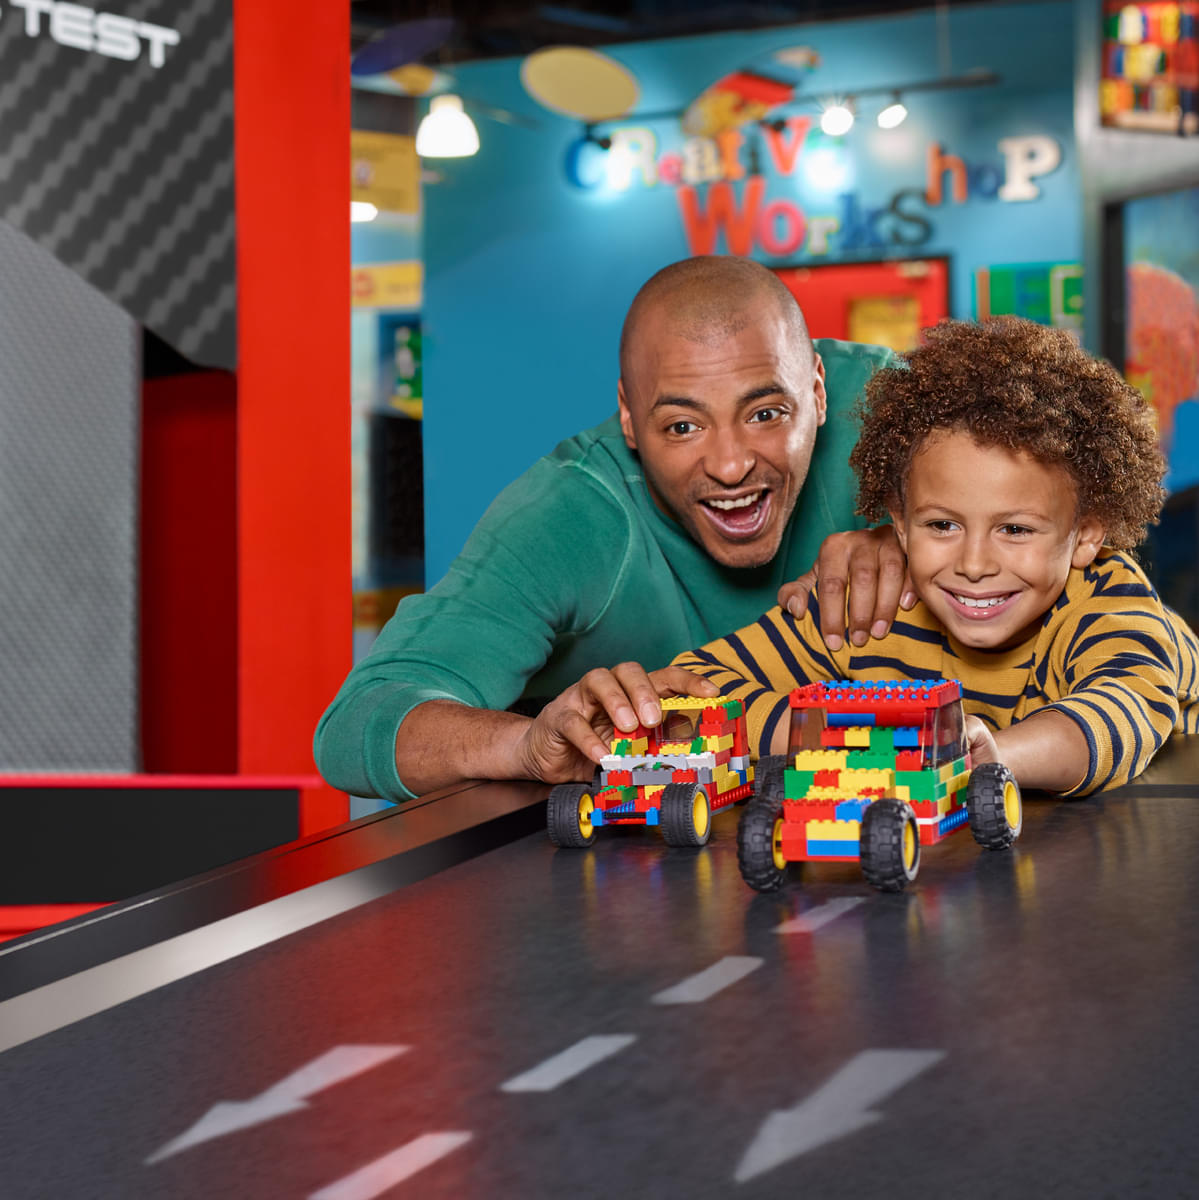 Visit Legoland Discovery Centre Hong Kong and spend a fun-filled time with your little ones